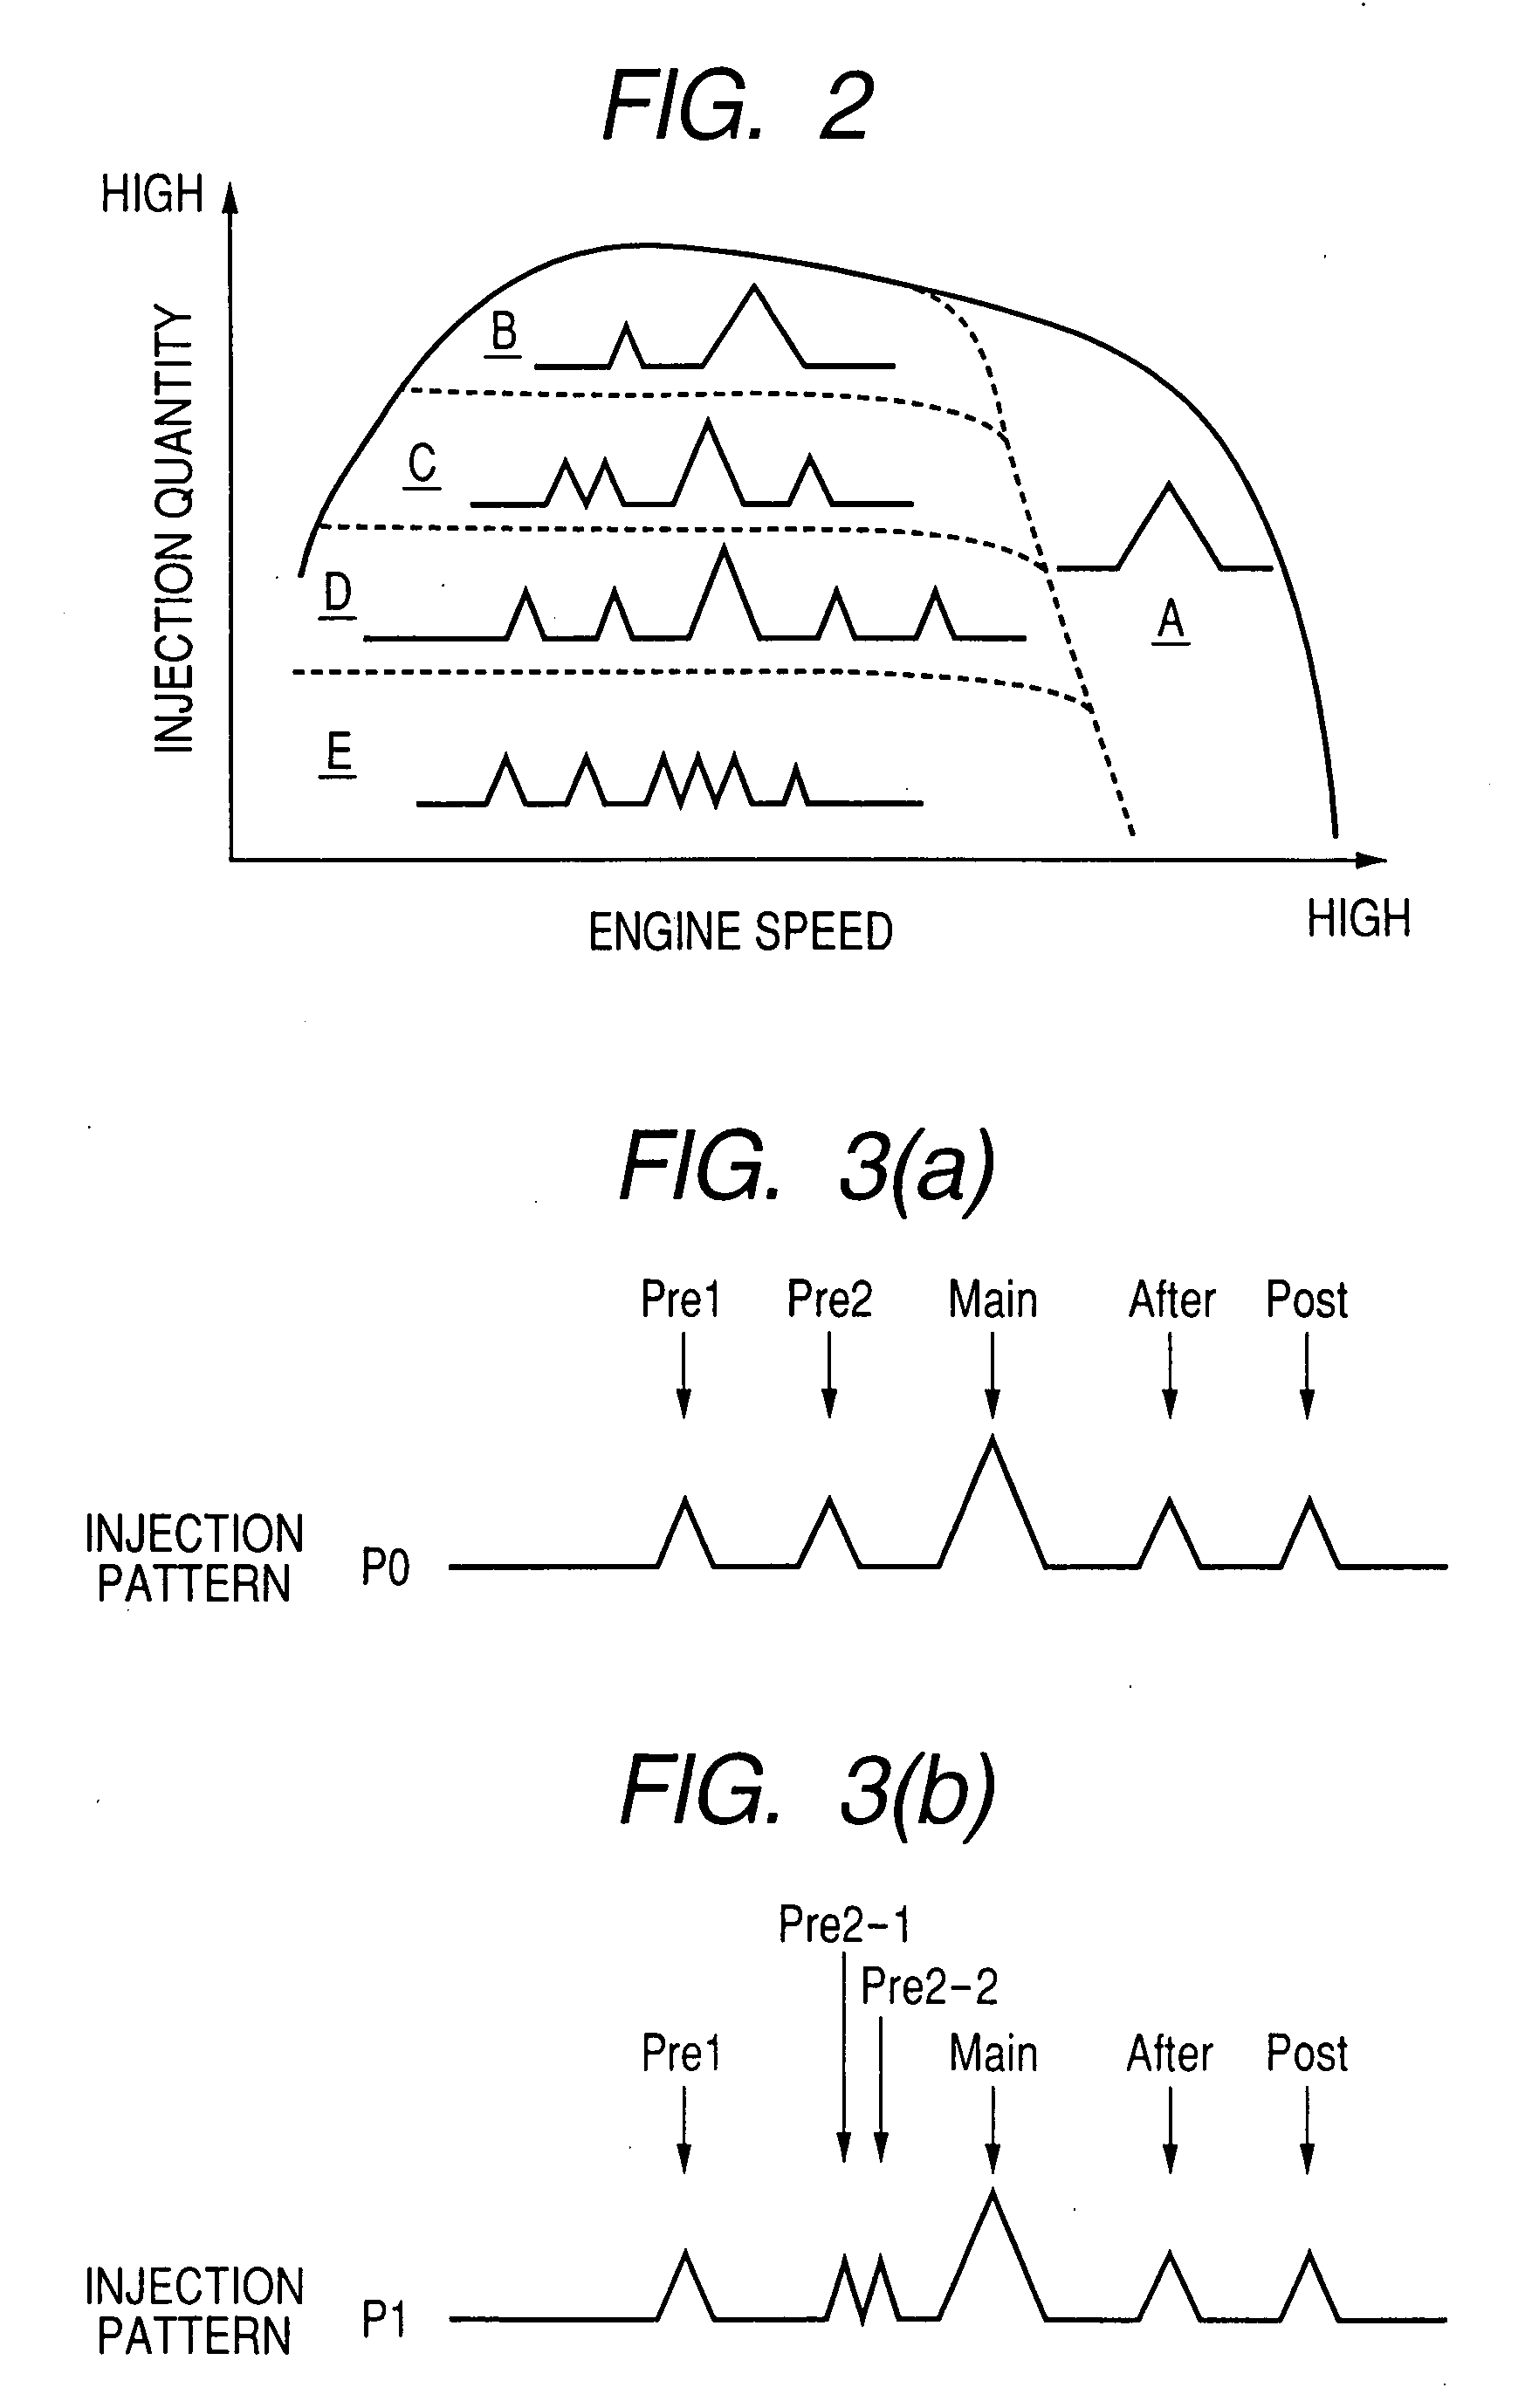 Fuel injection control apparatus designed to minimize combustion noise of engine